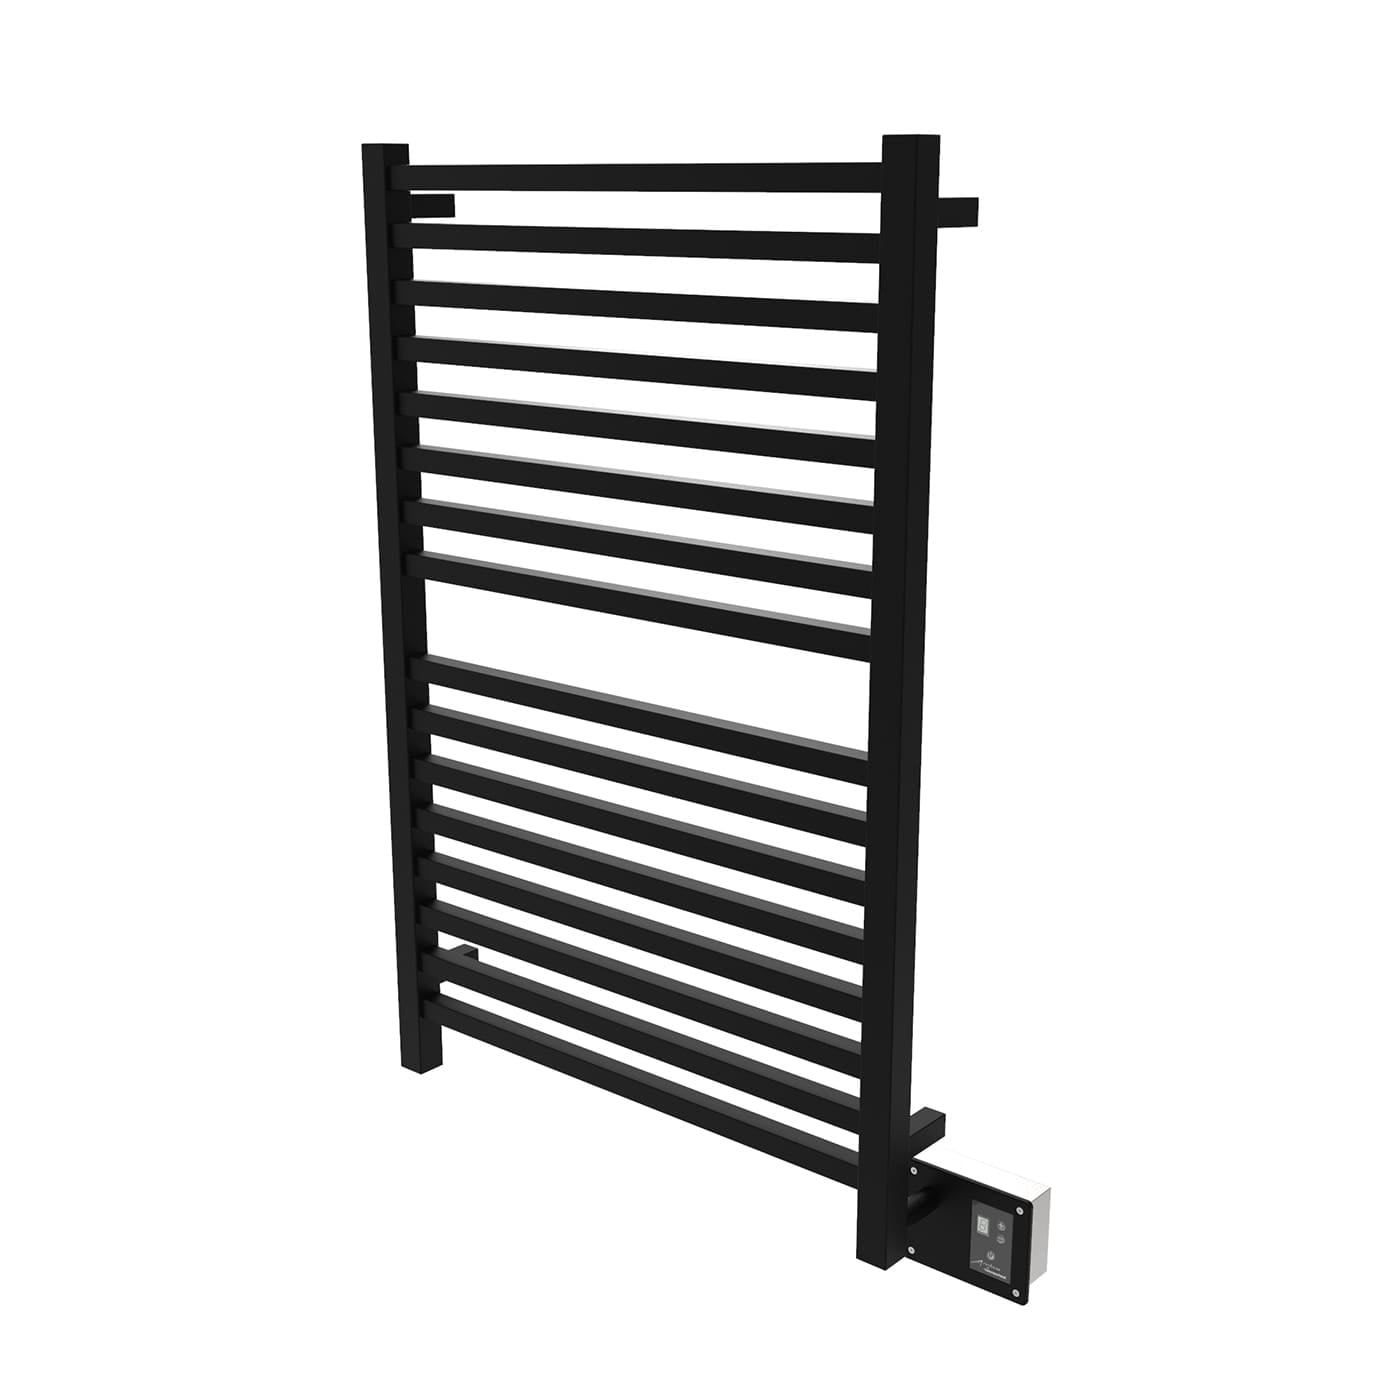 Picture of Amba Q2842MB 35.18 x 32.31 x 4 - 4.75 in. Towel Rack - Matte Black